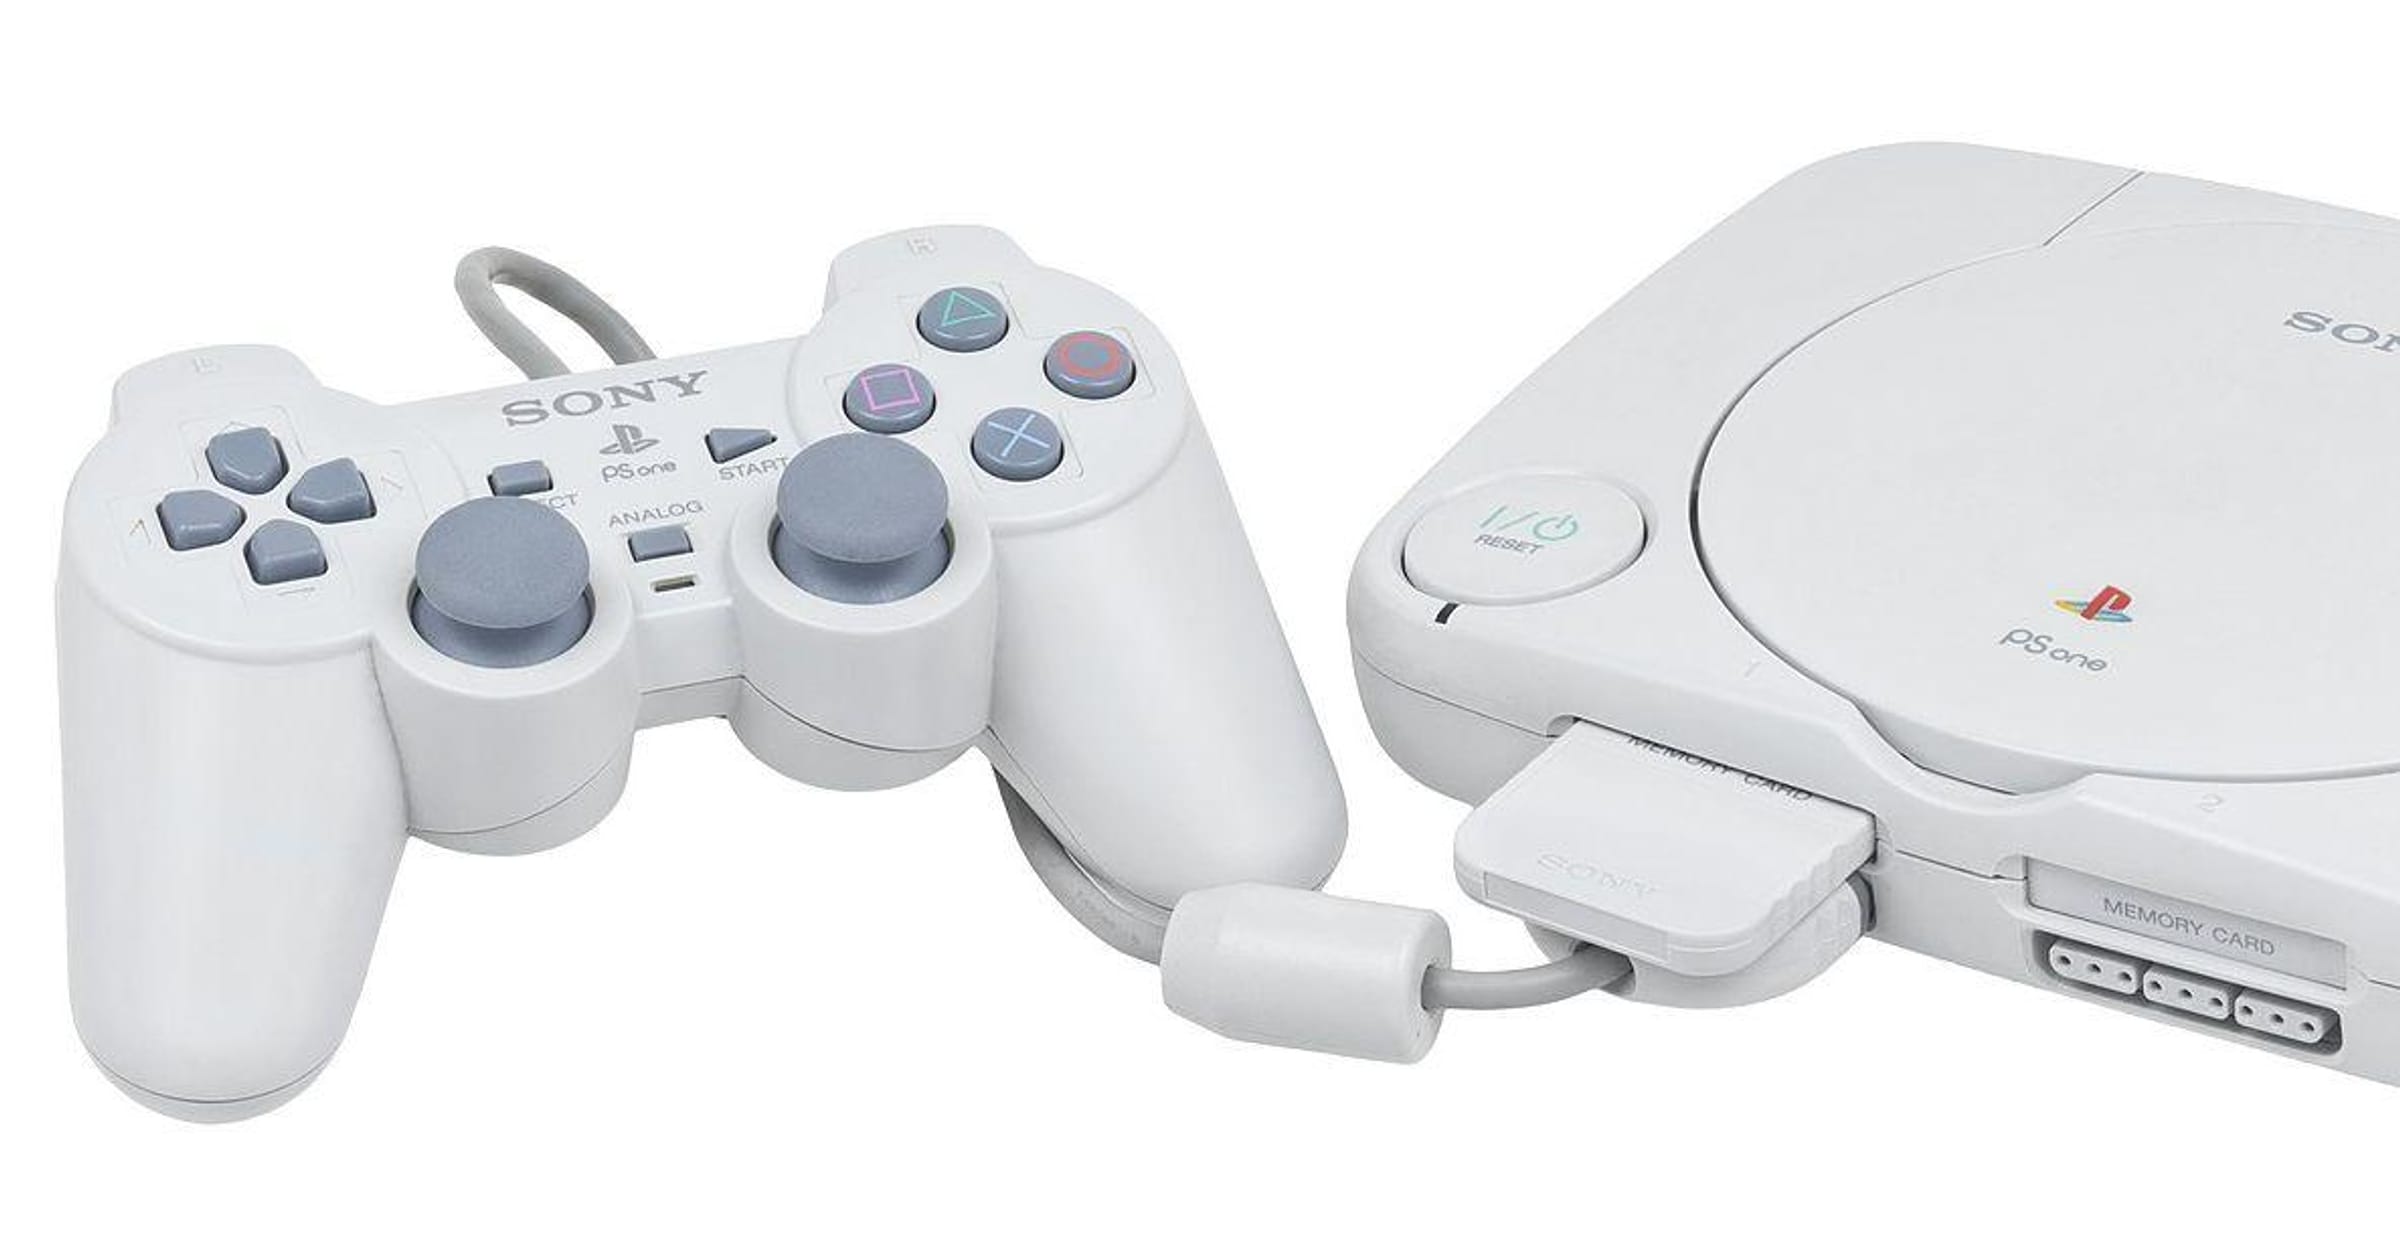 Sony Playstation PS One - Video Game Console